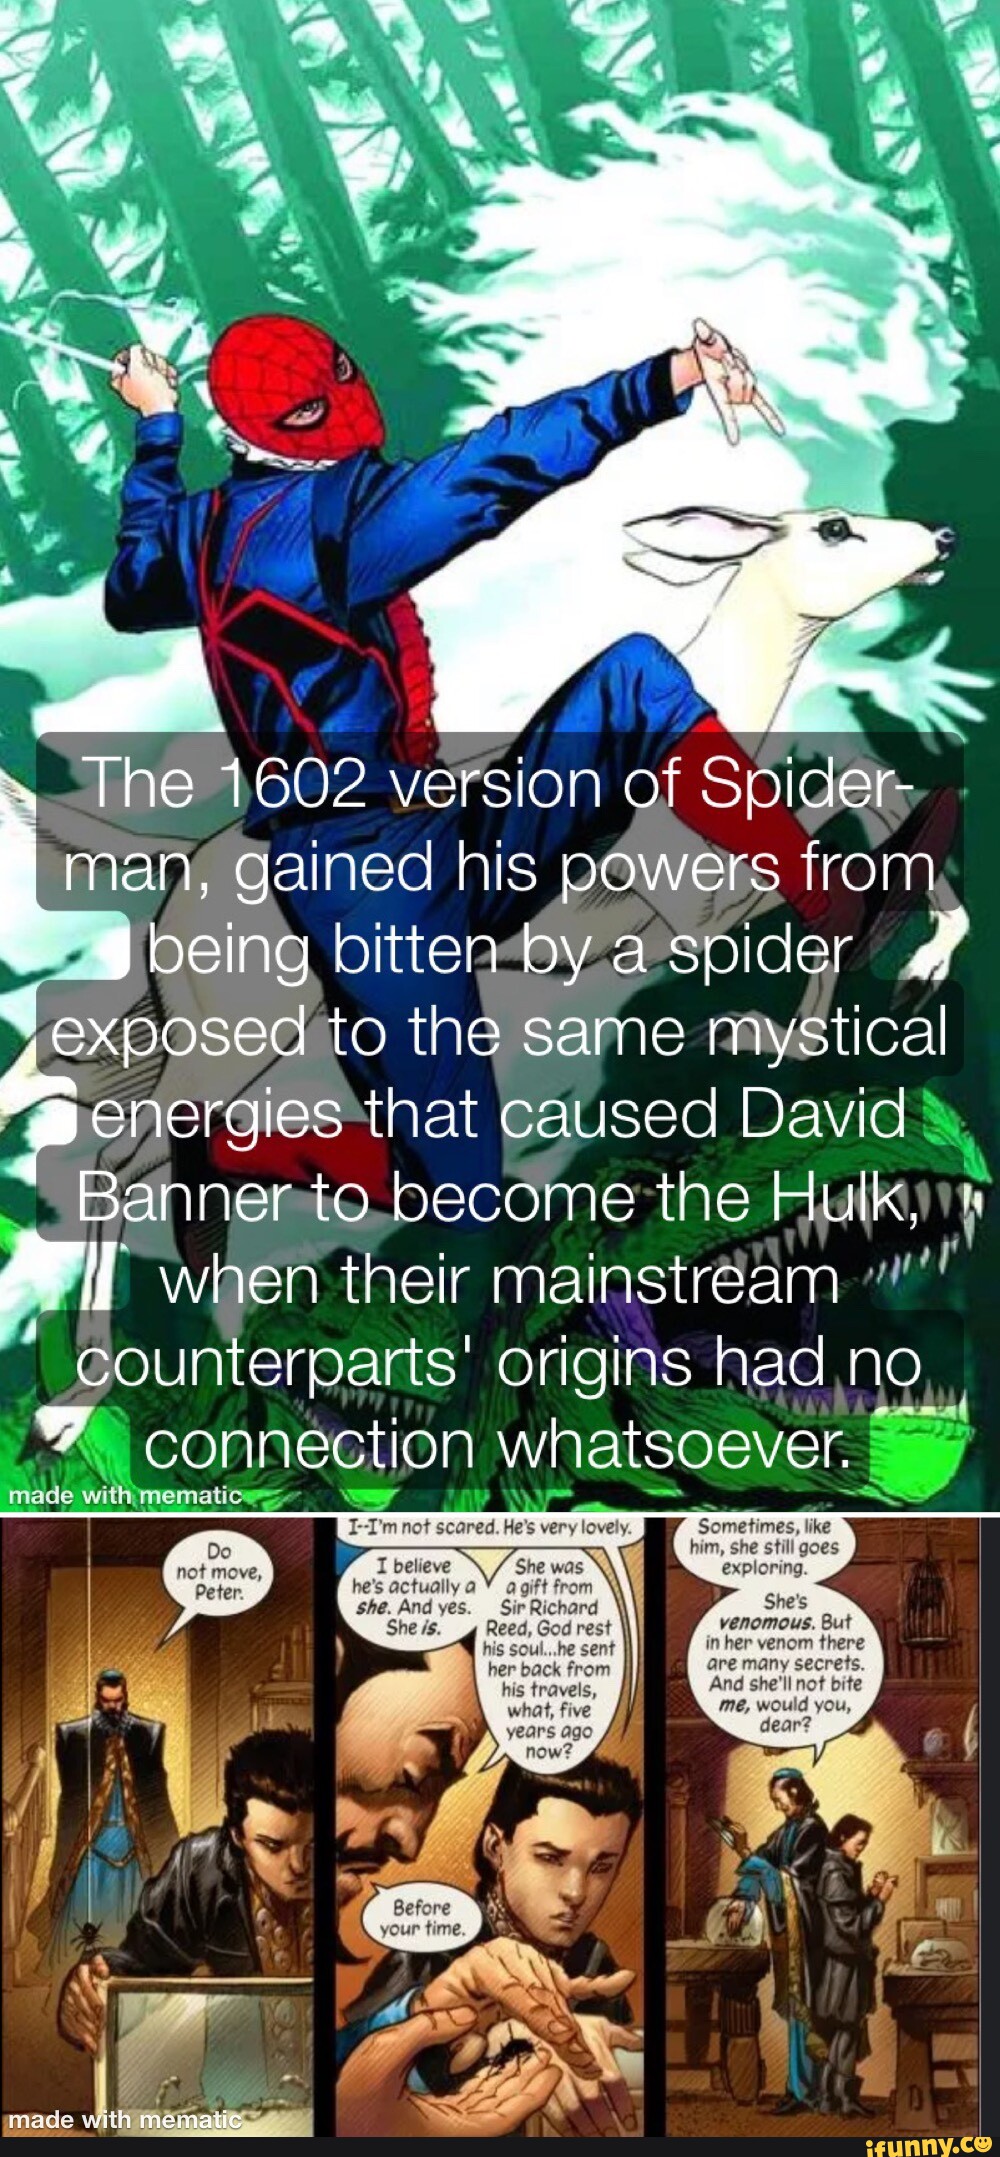 The 1602 version of Spider- man, gained his powers from being